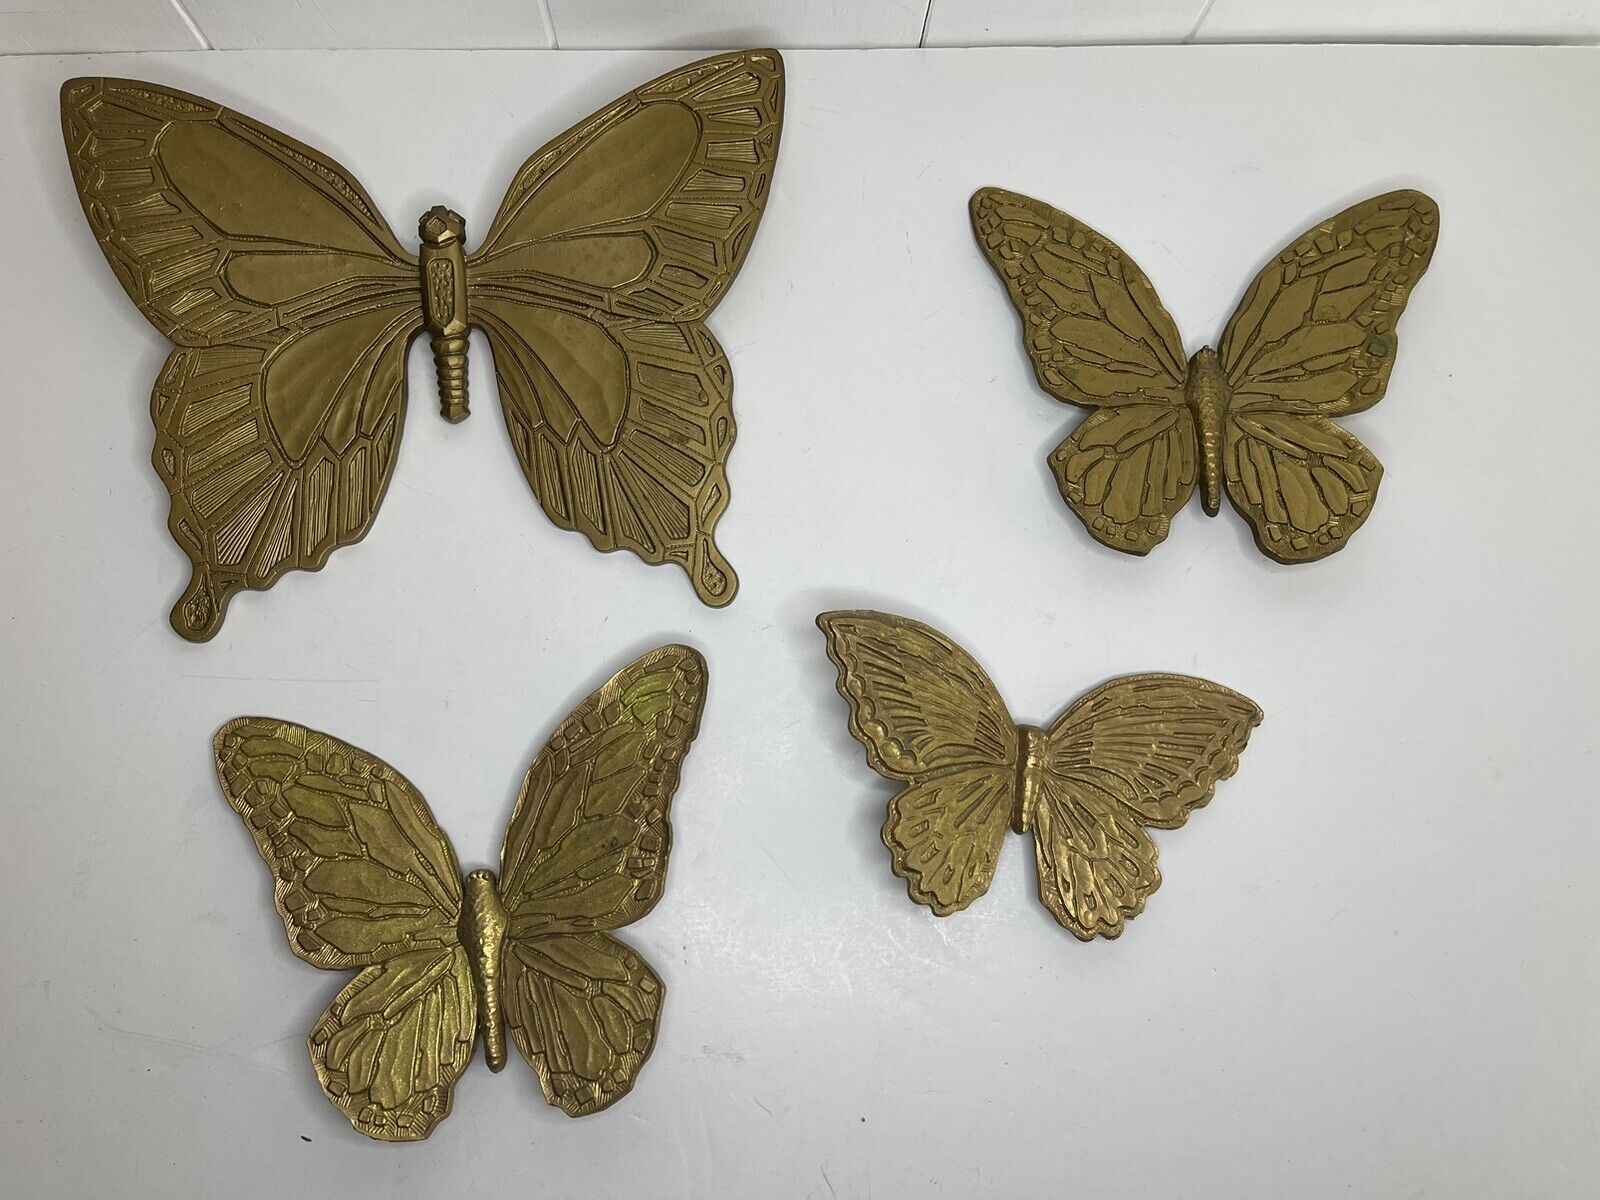 Vintage HOMCO Syroco Gold-tone Butterflies Plastic Hanging Wall Art Decor 1971